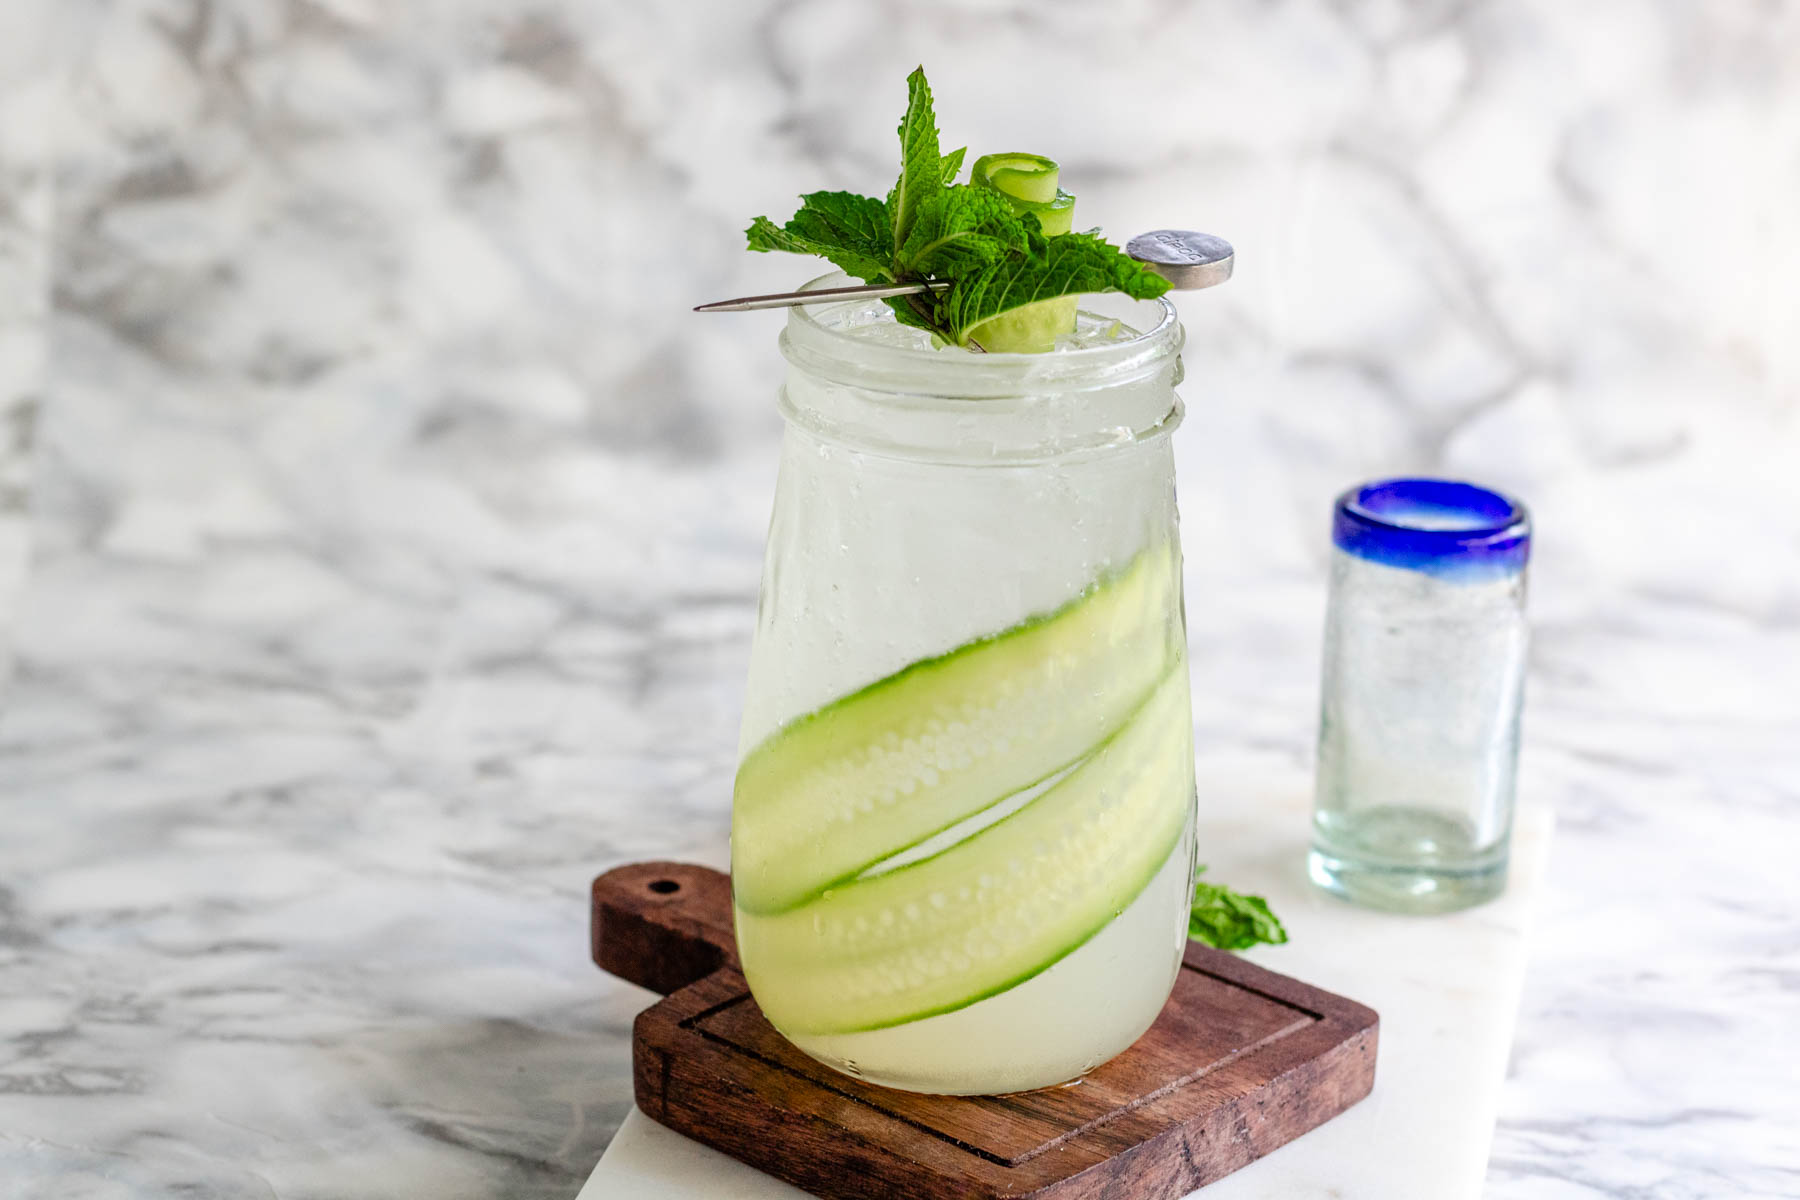 A tapered glass holds a clear drink with cucumber ribbons in it and a mint cucumber garnish on top.